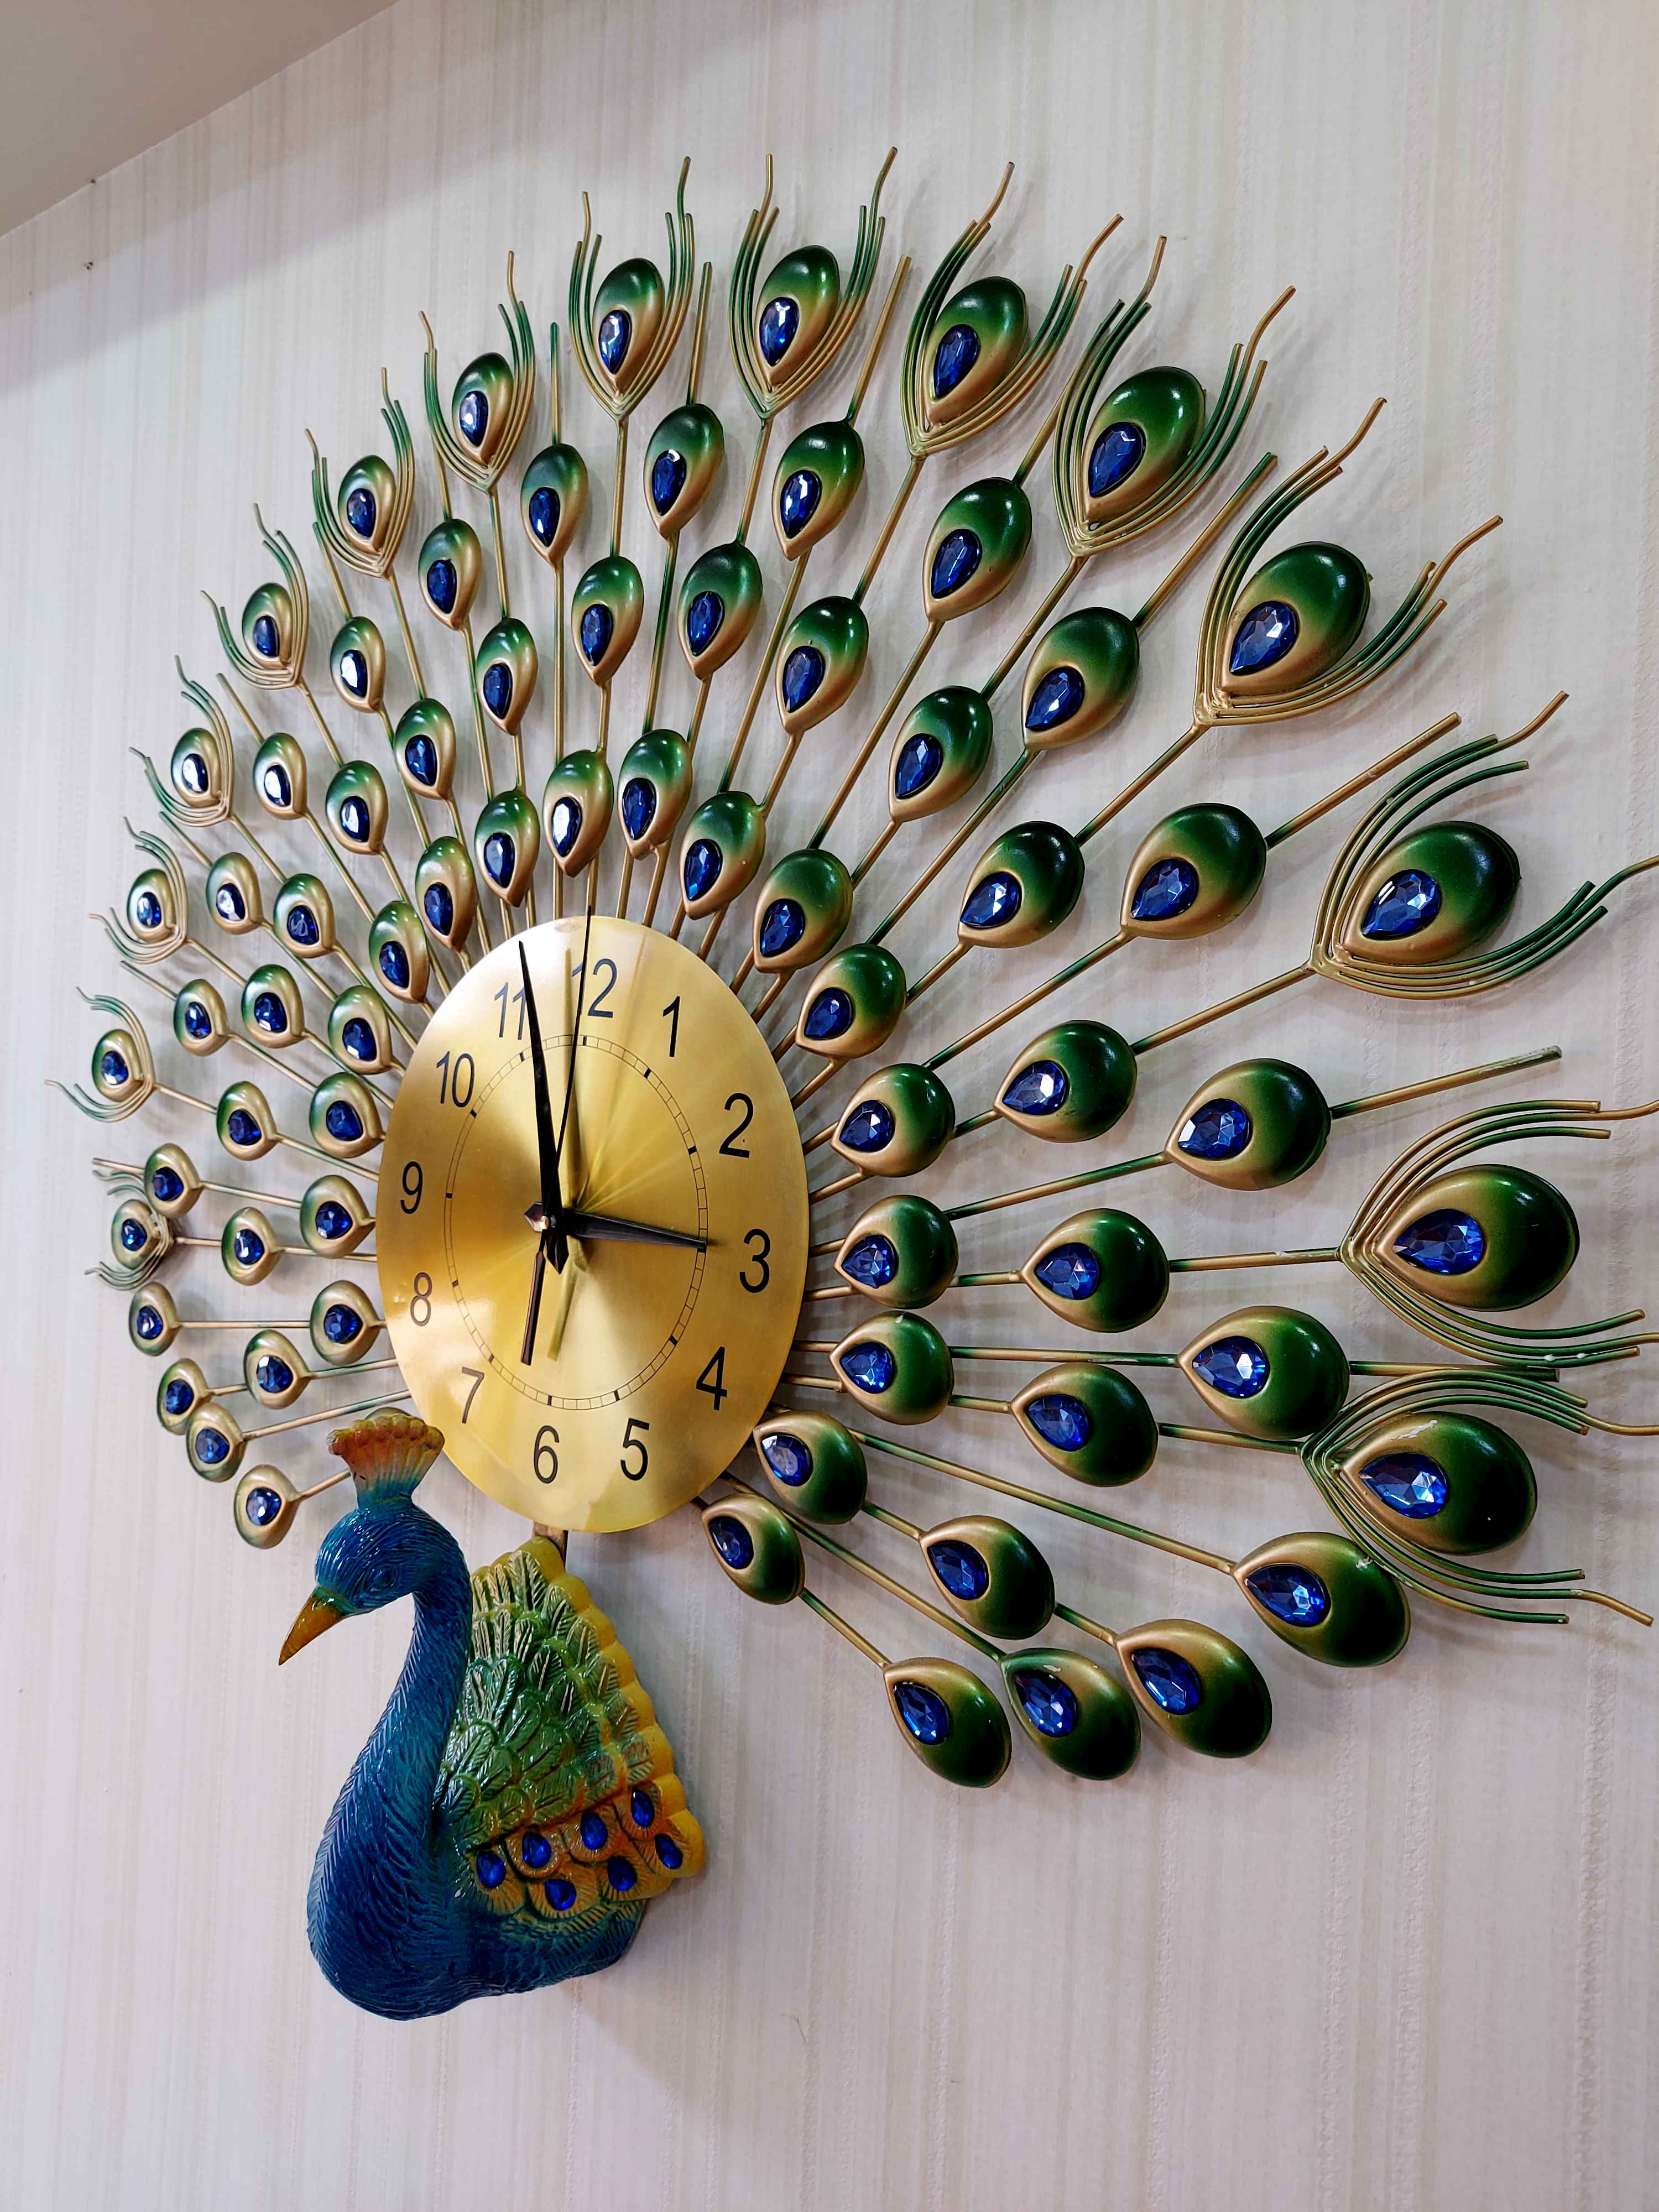 FunkyTradition 3D Peacock Feather Open Wall Clock, Wall Watch, Wall Decor for Home Office Decor and Gifts 80 CM Tall